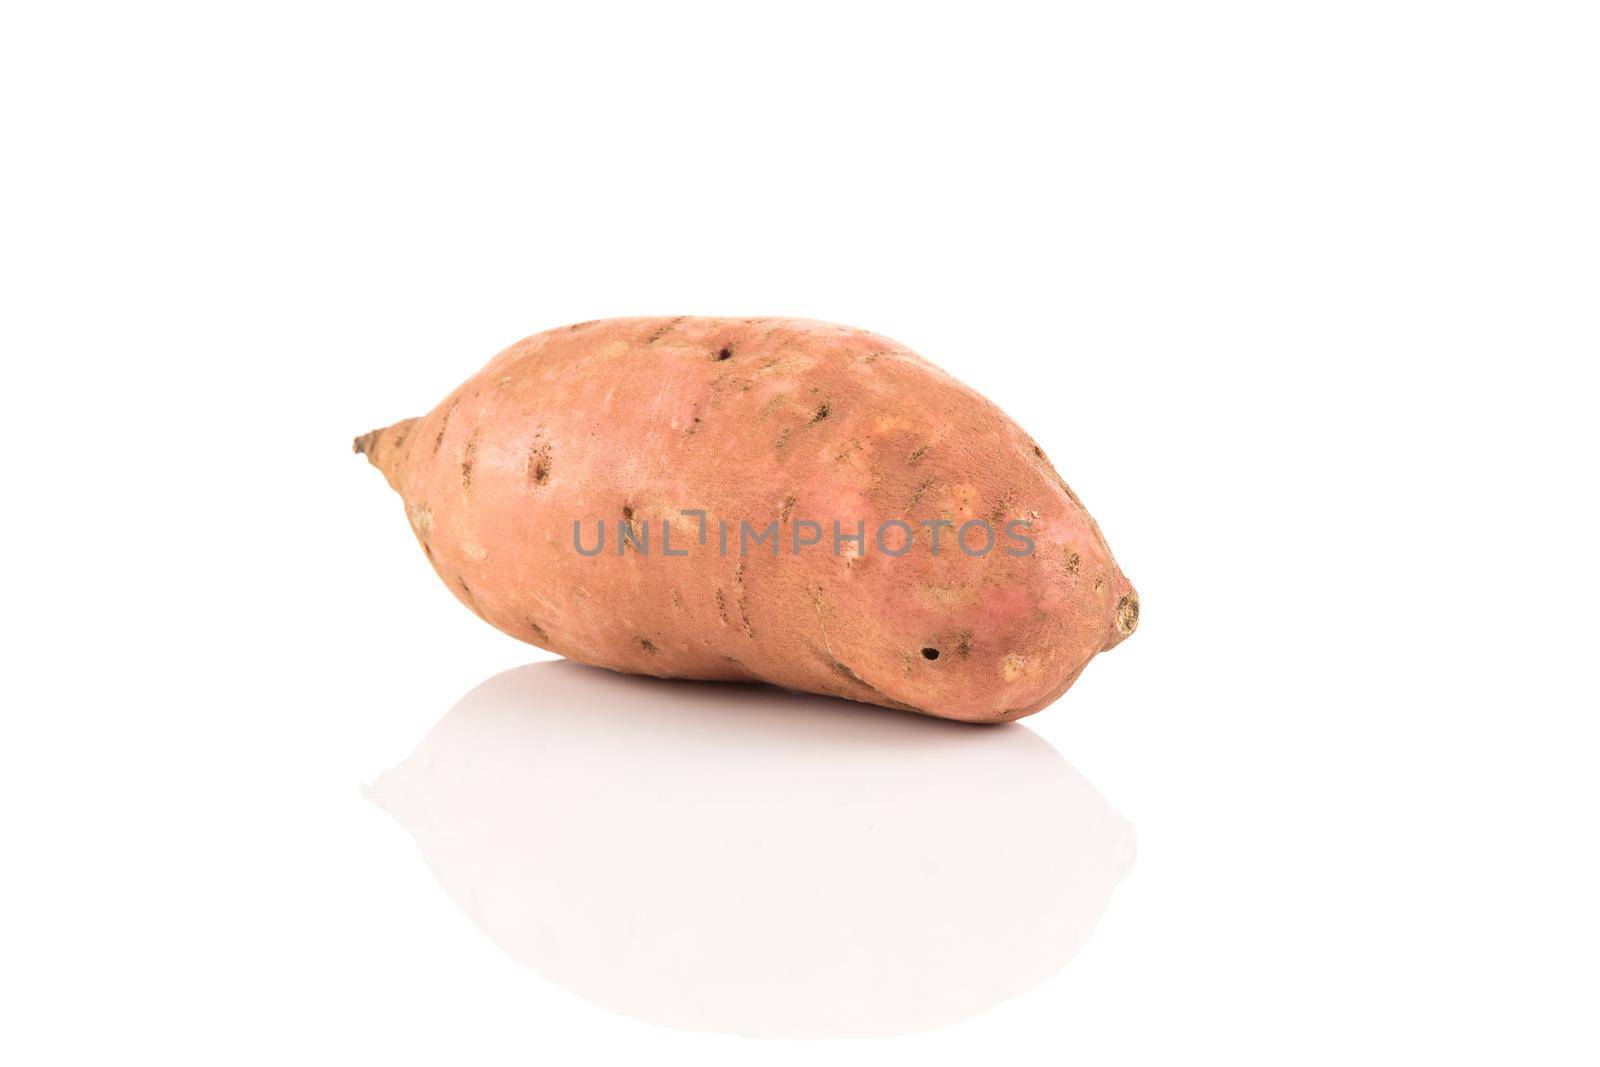 Sweet potato on the white background by RTsubin